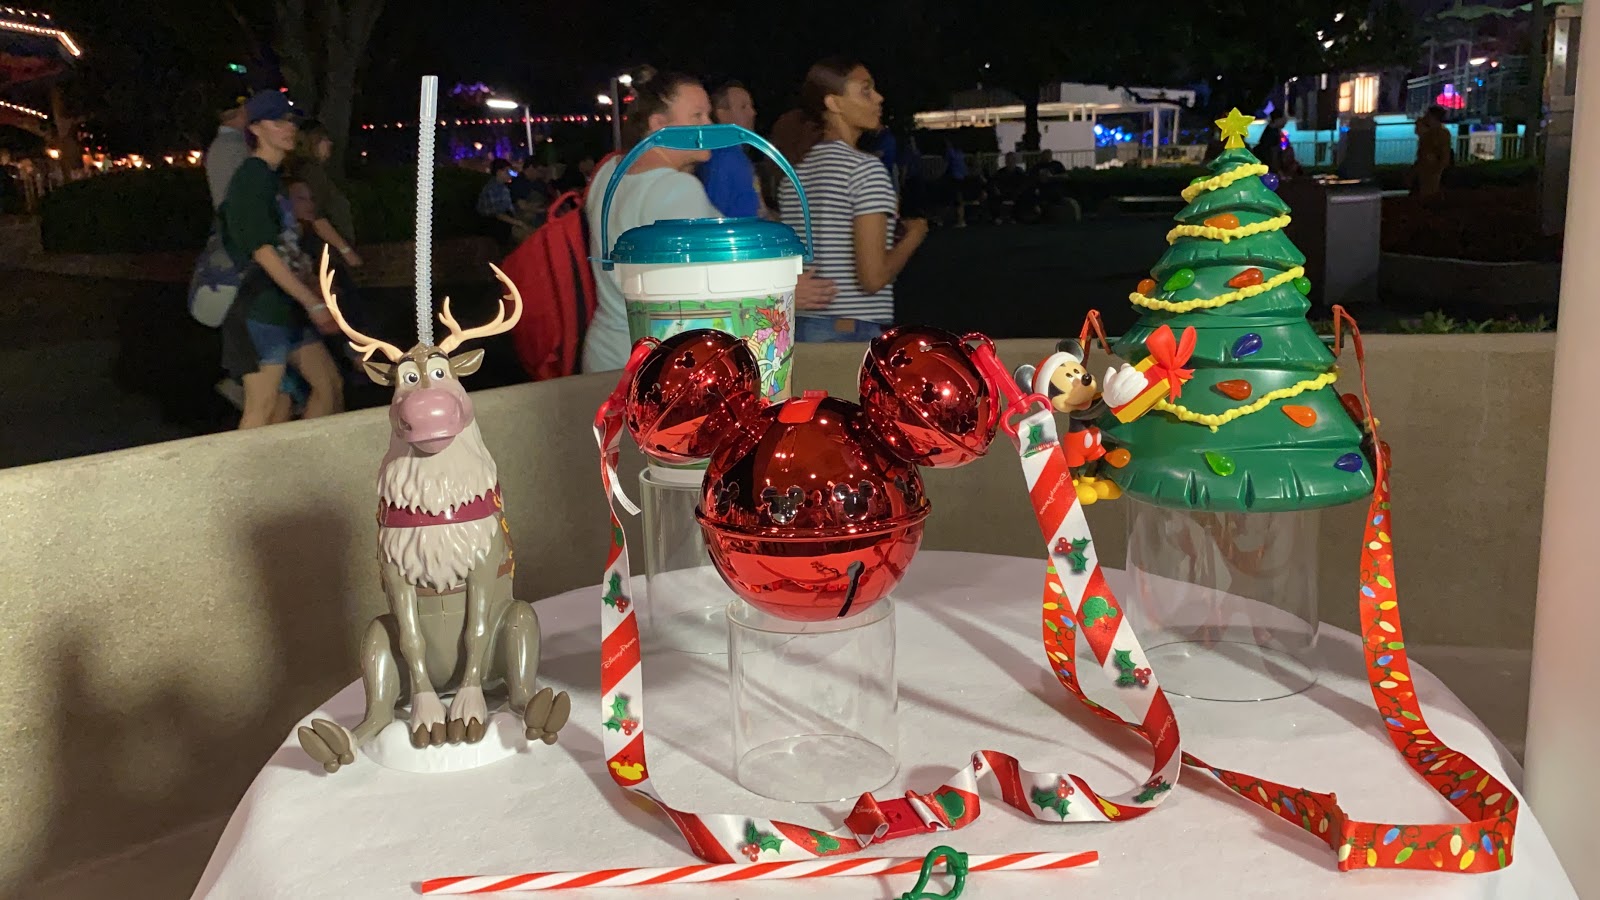 Recapping a 2019 Mickey’s Very Merry Christmas Party at Magic Kingdom - www.bagssaleusa.com